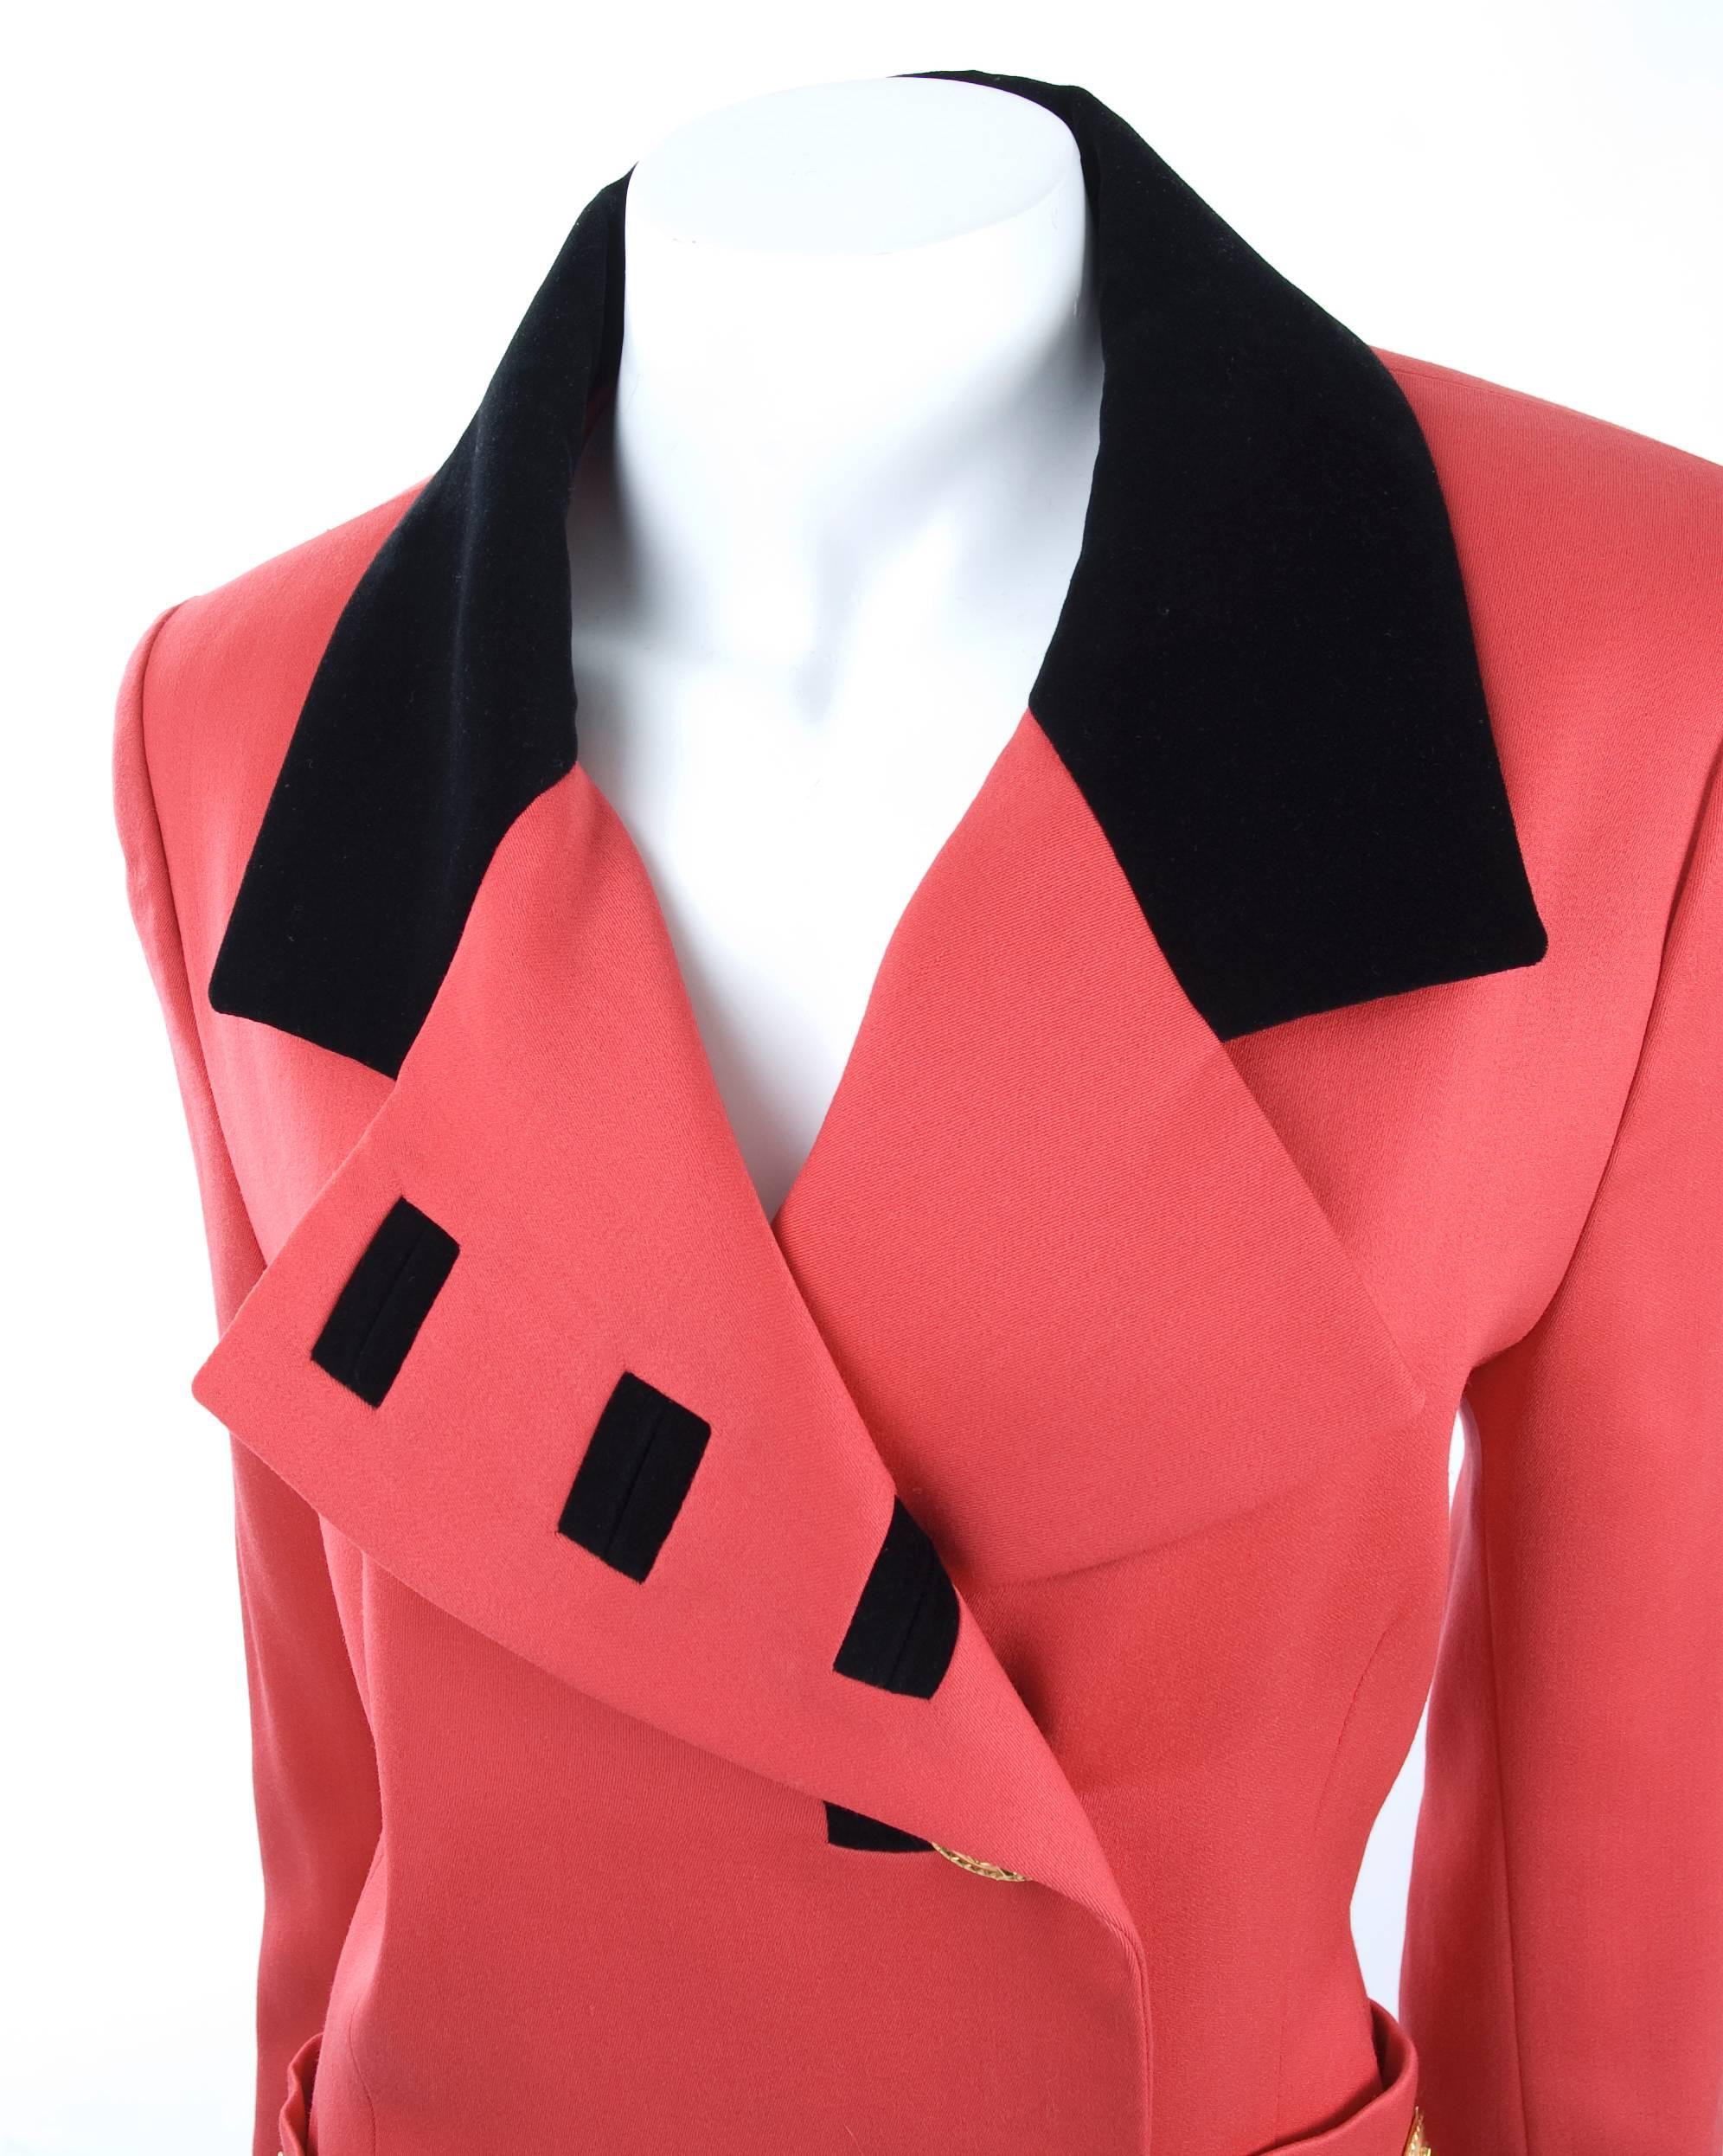 Jaques Fath Jacket in Lipstick Red and Black Velvet In Excellent Condition For Sale In Hamburg, Deutschland